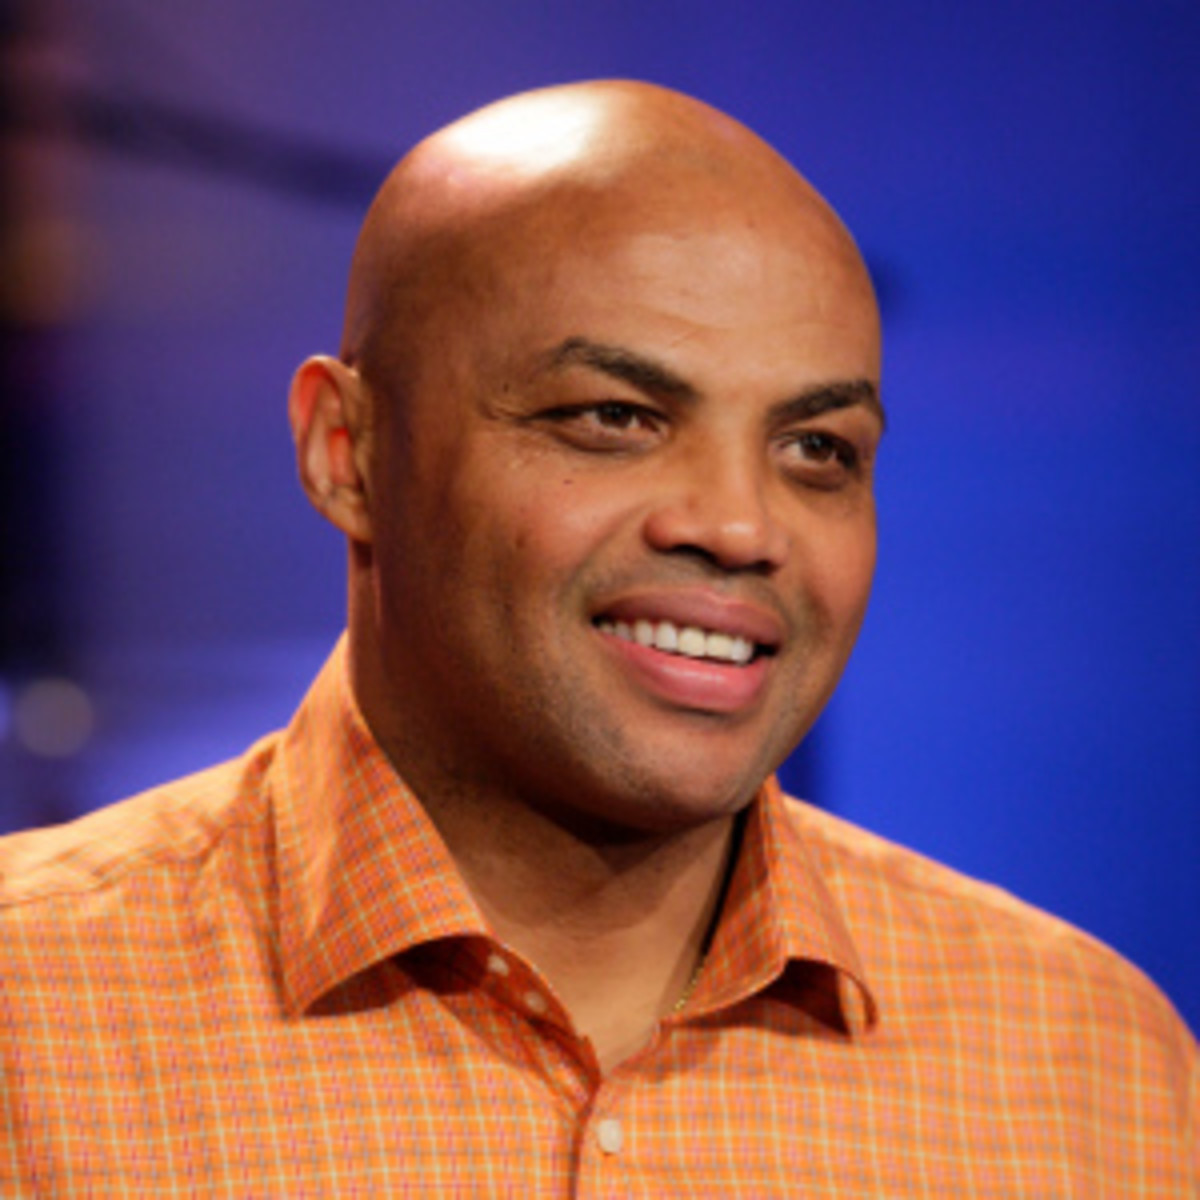 Charles Barkley said he "probably had three or four gay teammates." (NBC/Getty Images)